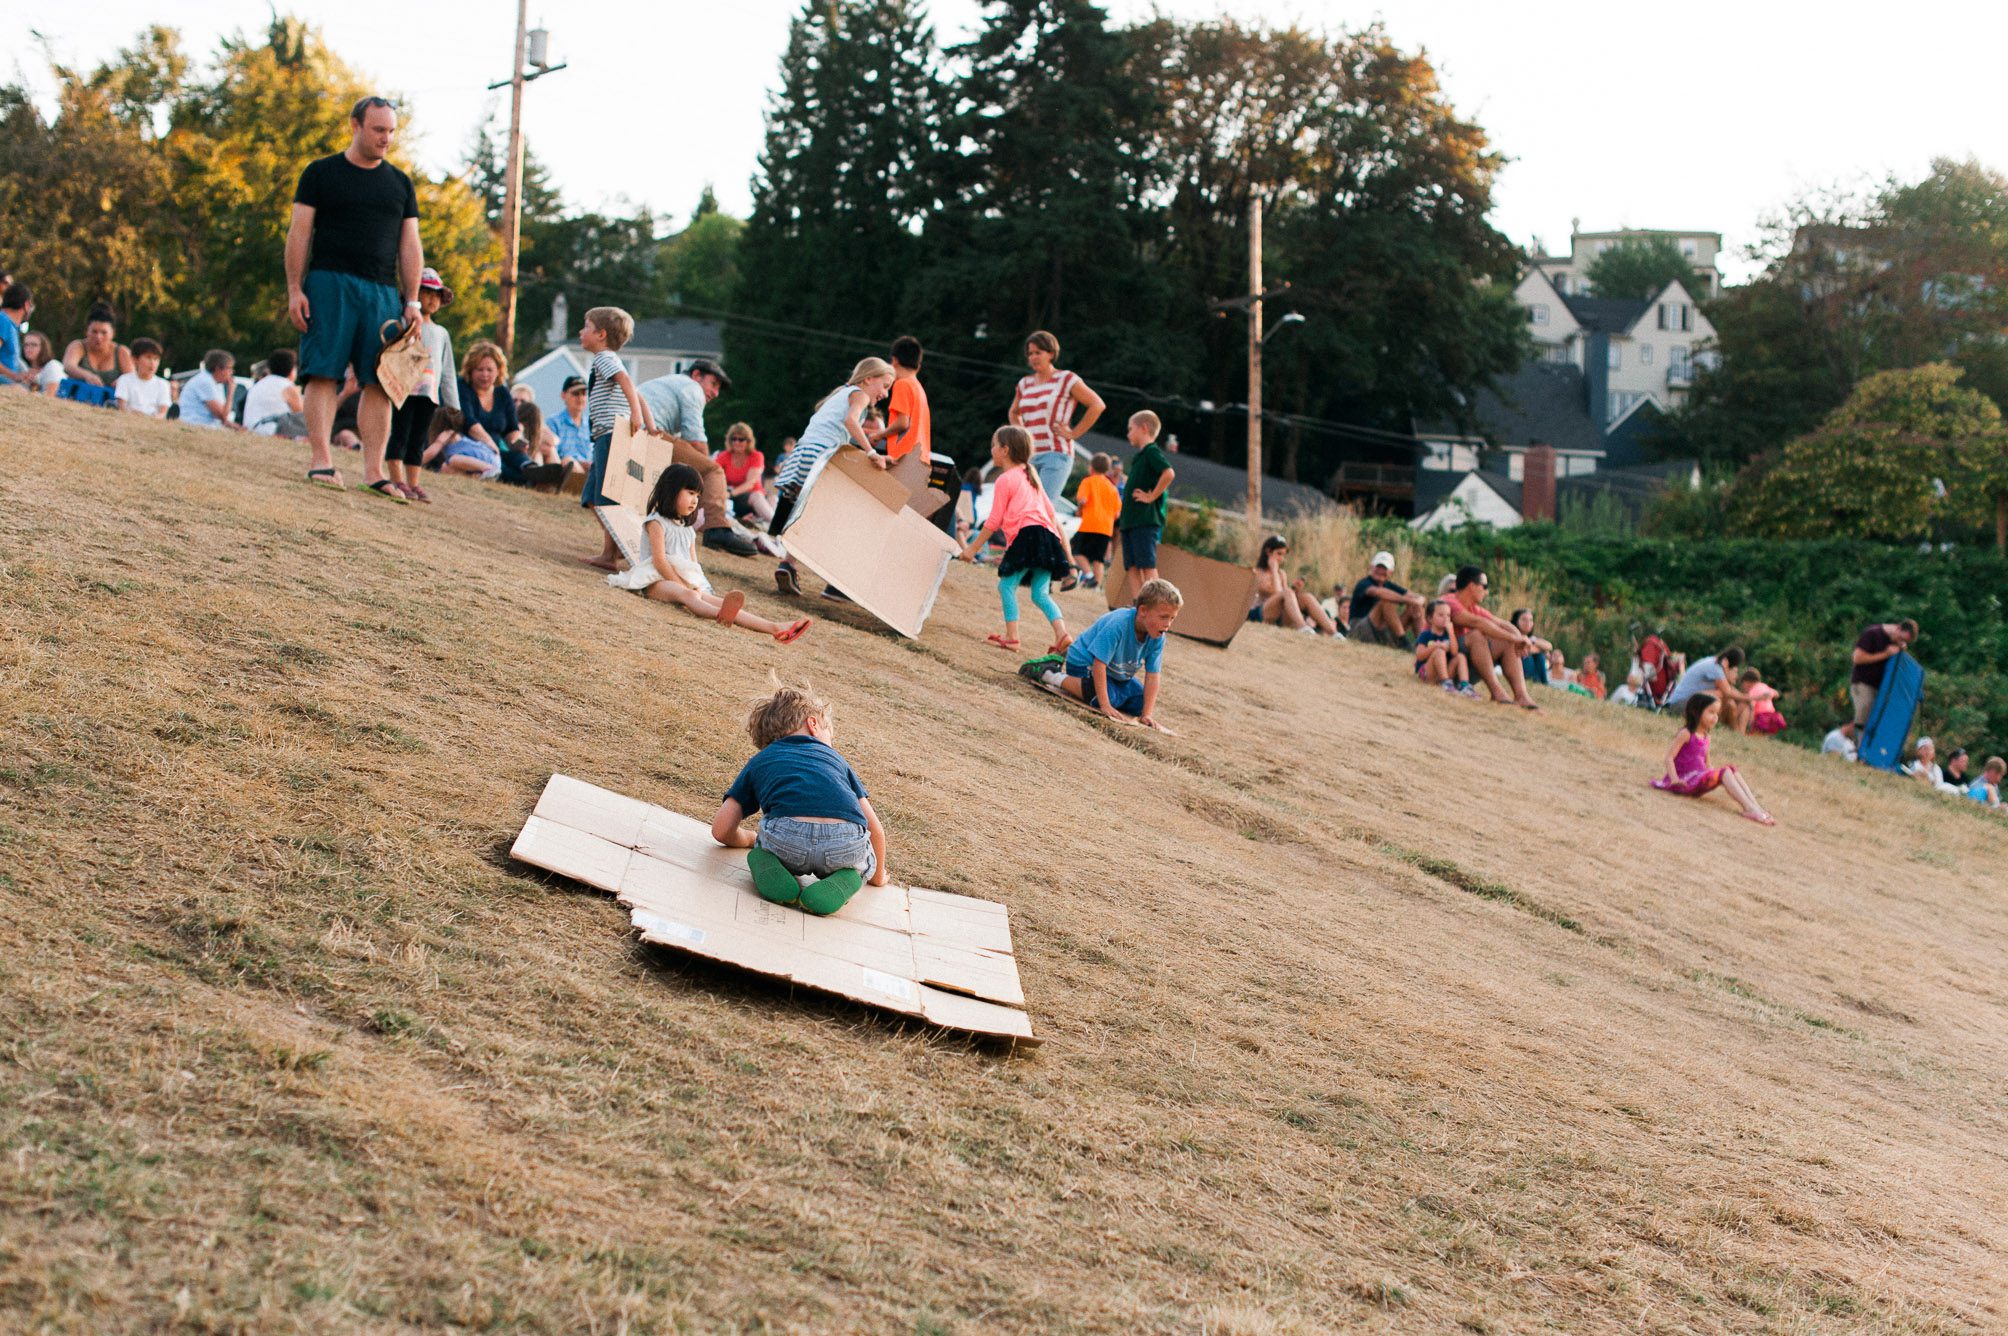 Local kids sliding down a grassy hill on pieces of cardboard while their parents wait for the Swifts to descend into Chapman Elementary School's Chimney. Photography by Briana Morrison